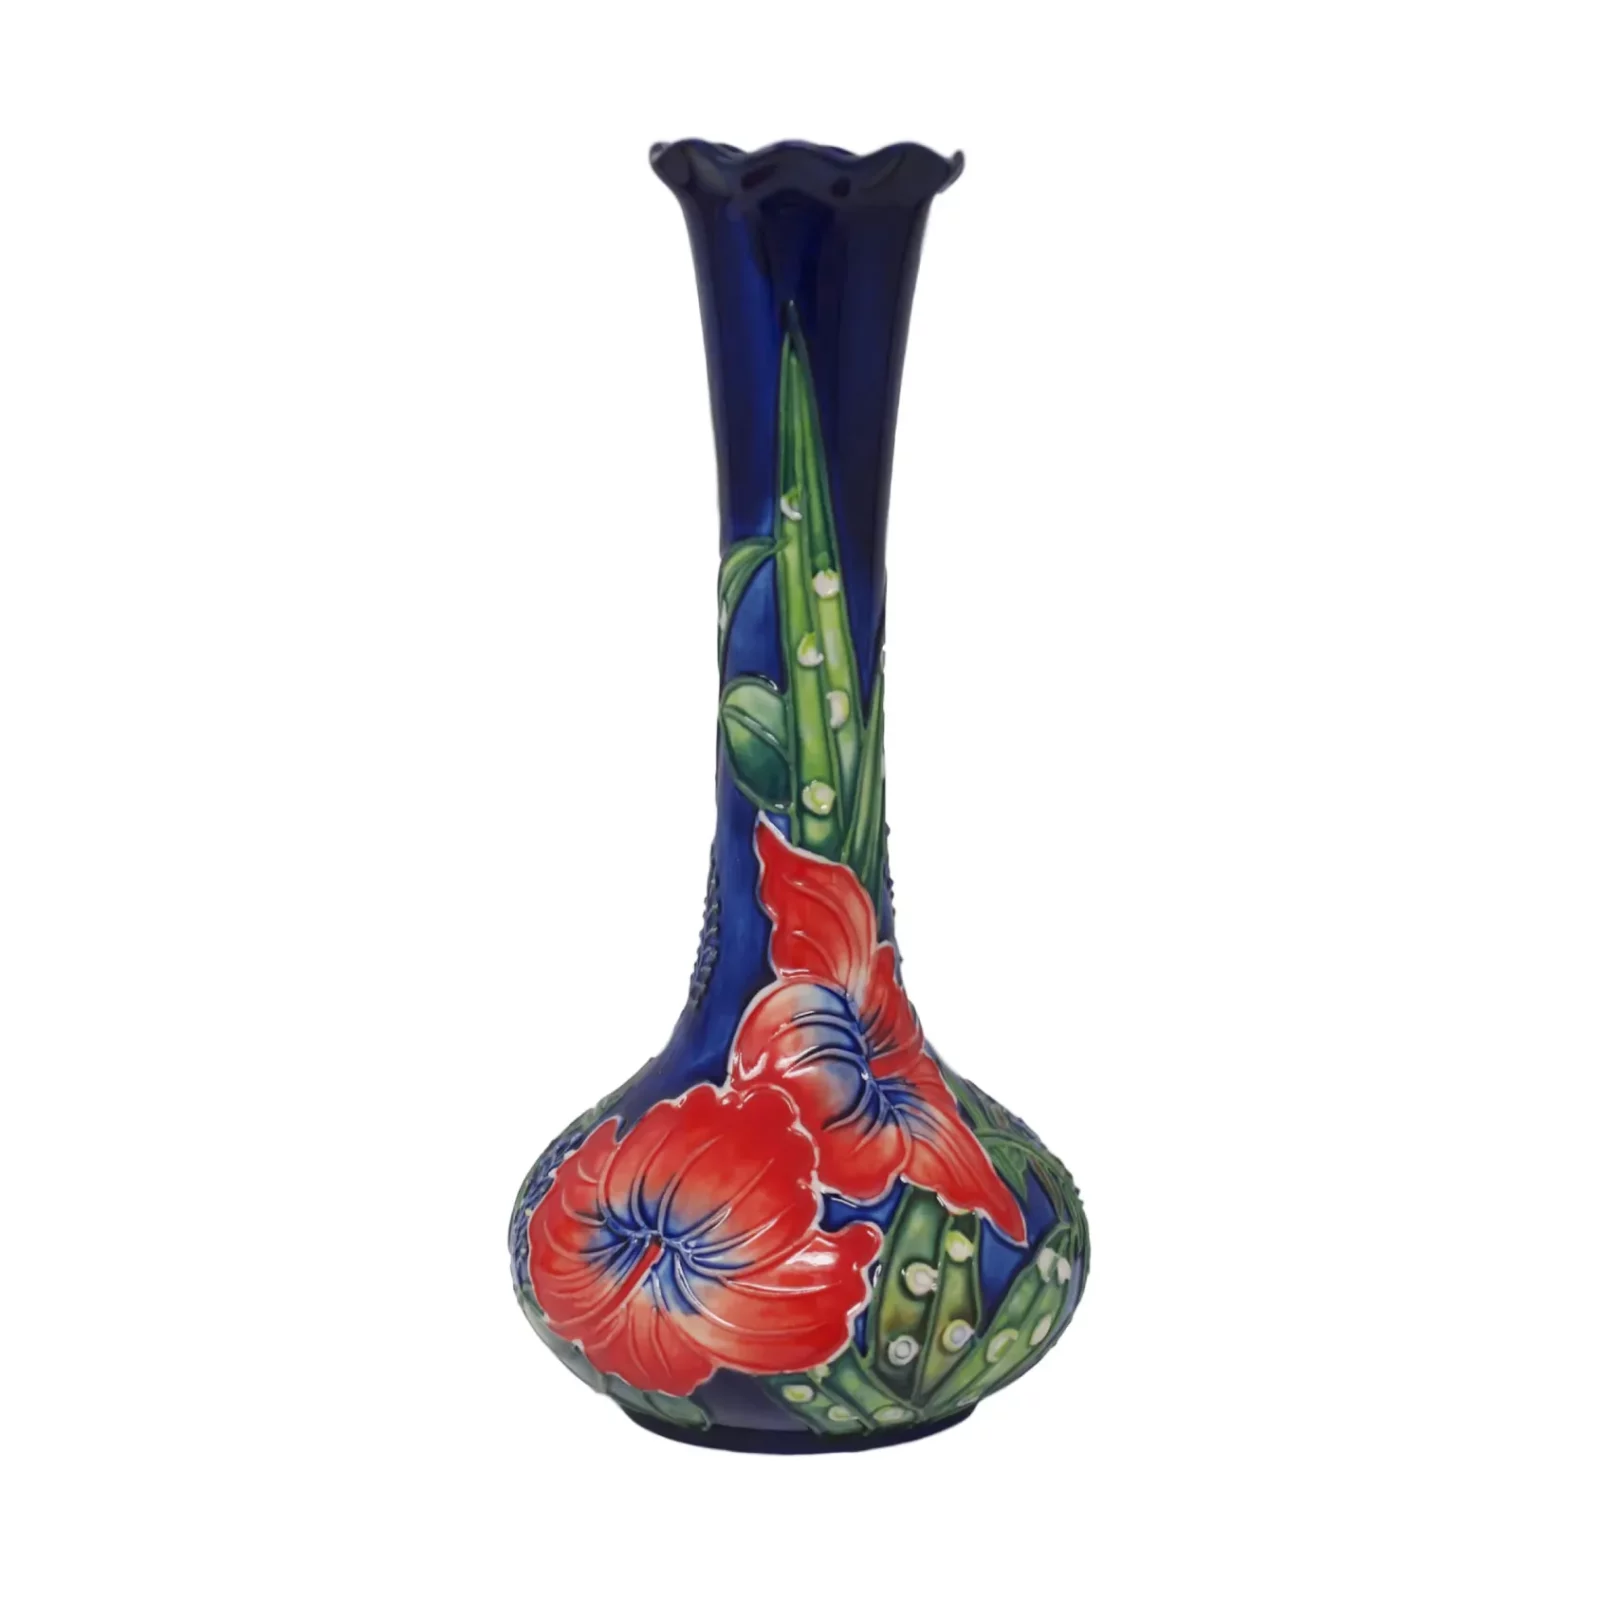 stem vase red flowers and navy blue background all hand painted